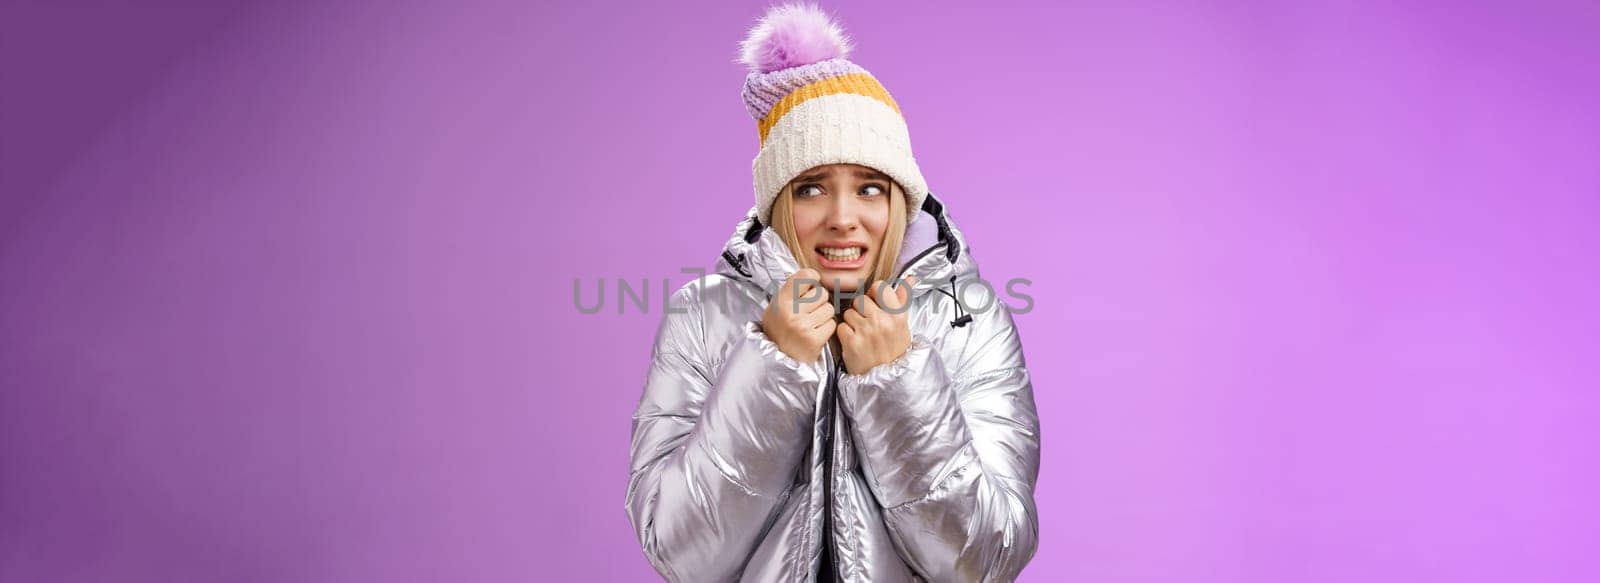 Freezing uncomfortable trembling cute blond girl in hat pull jacket tight feeling cold walking snowy mountains low temperature clenching teeth stooping shaking, standing upset purple background.